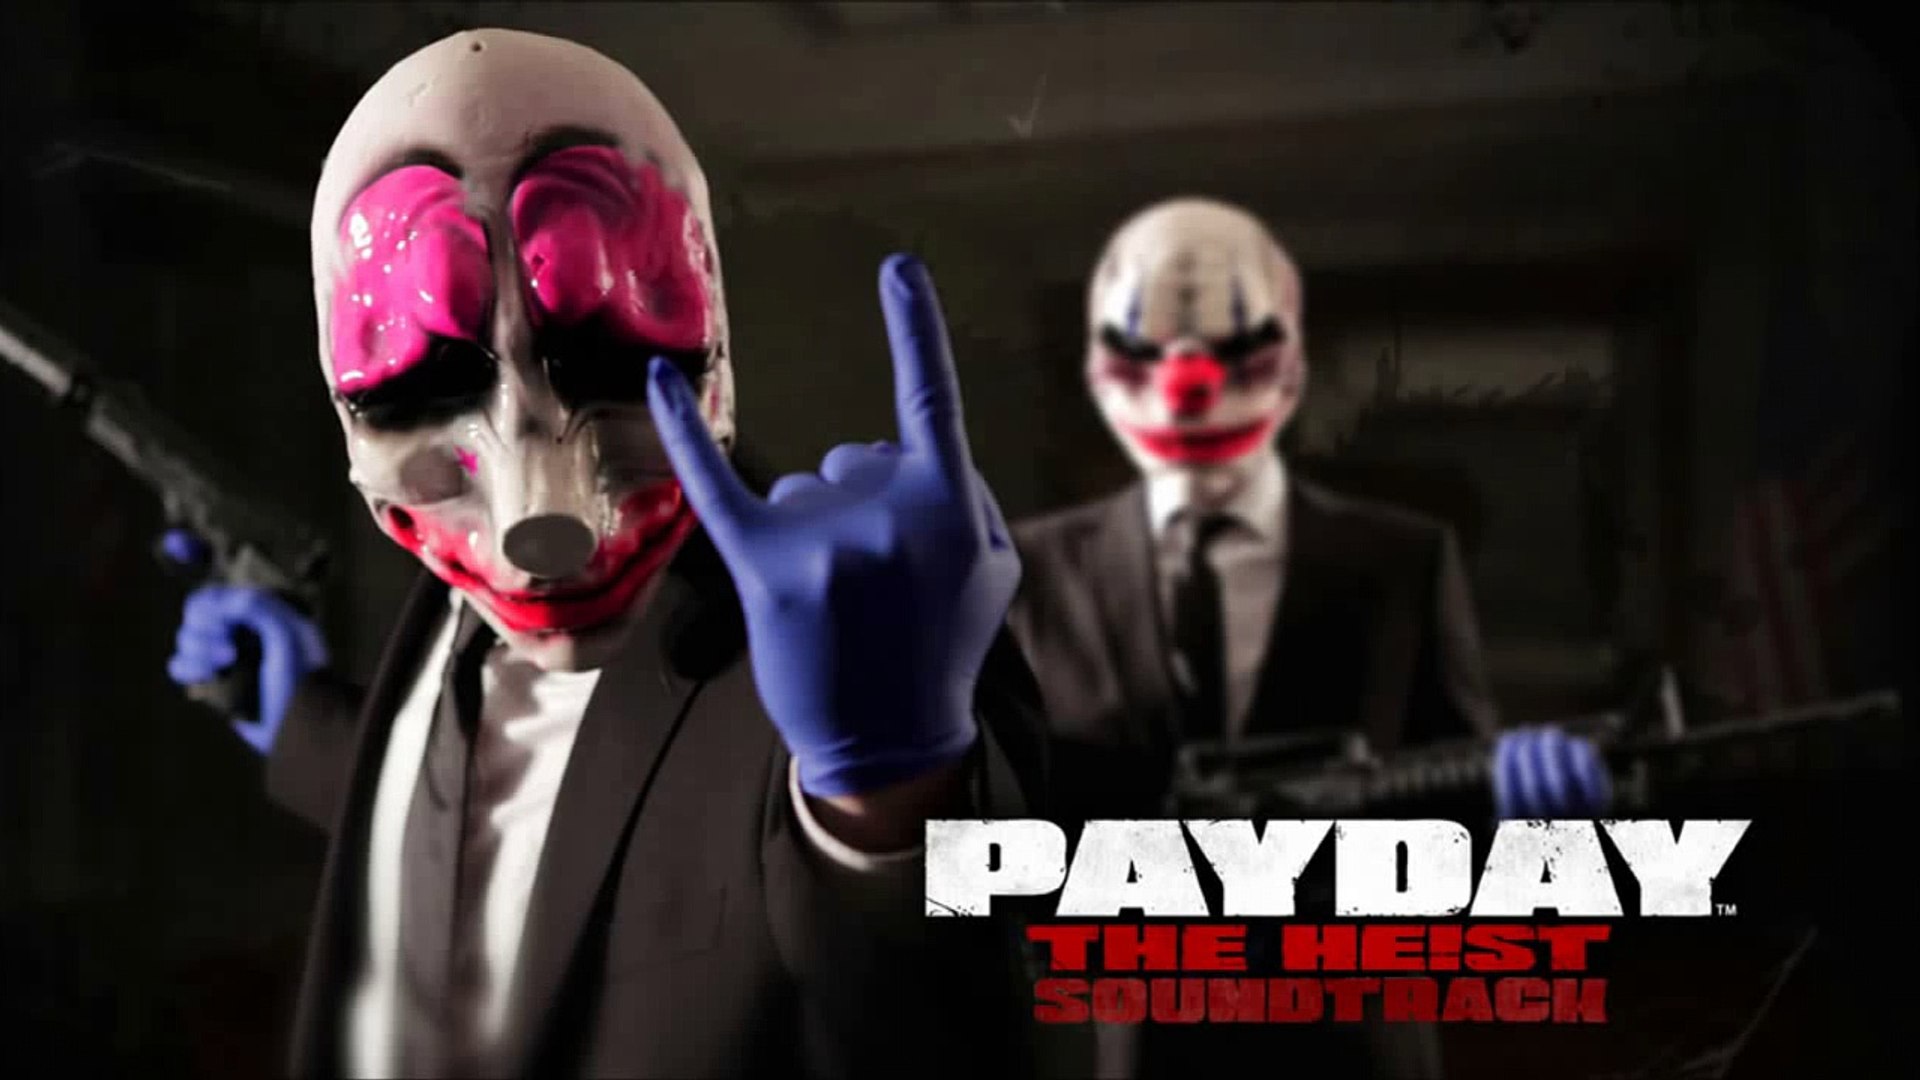 Payday The Heist Soundtrack Gun Metal Grey First World Bank Images, Photos, Reviews